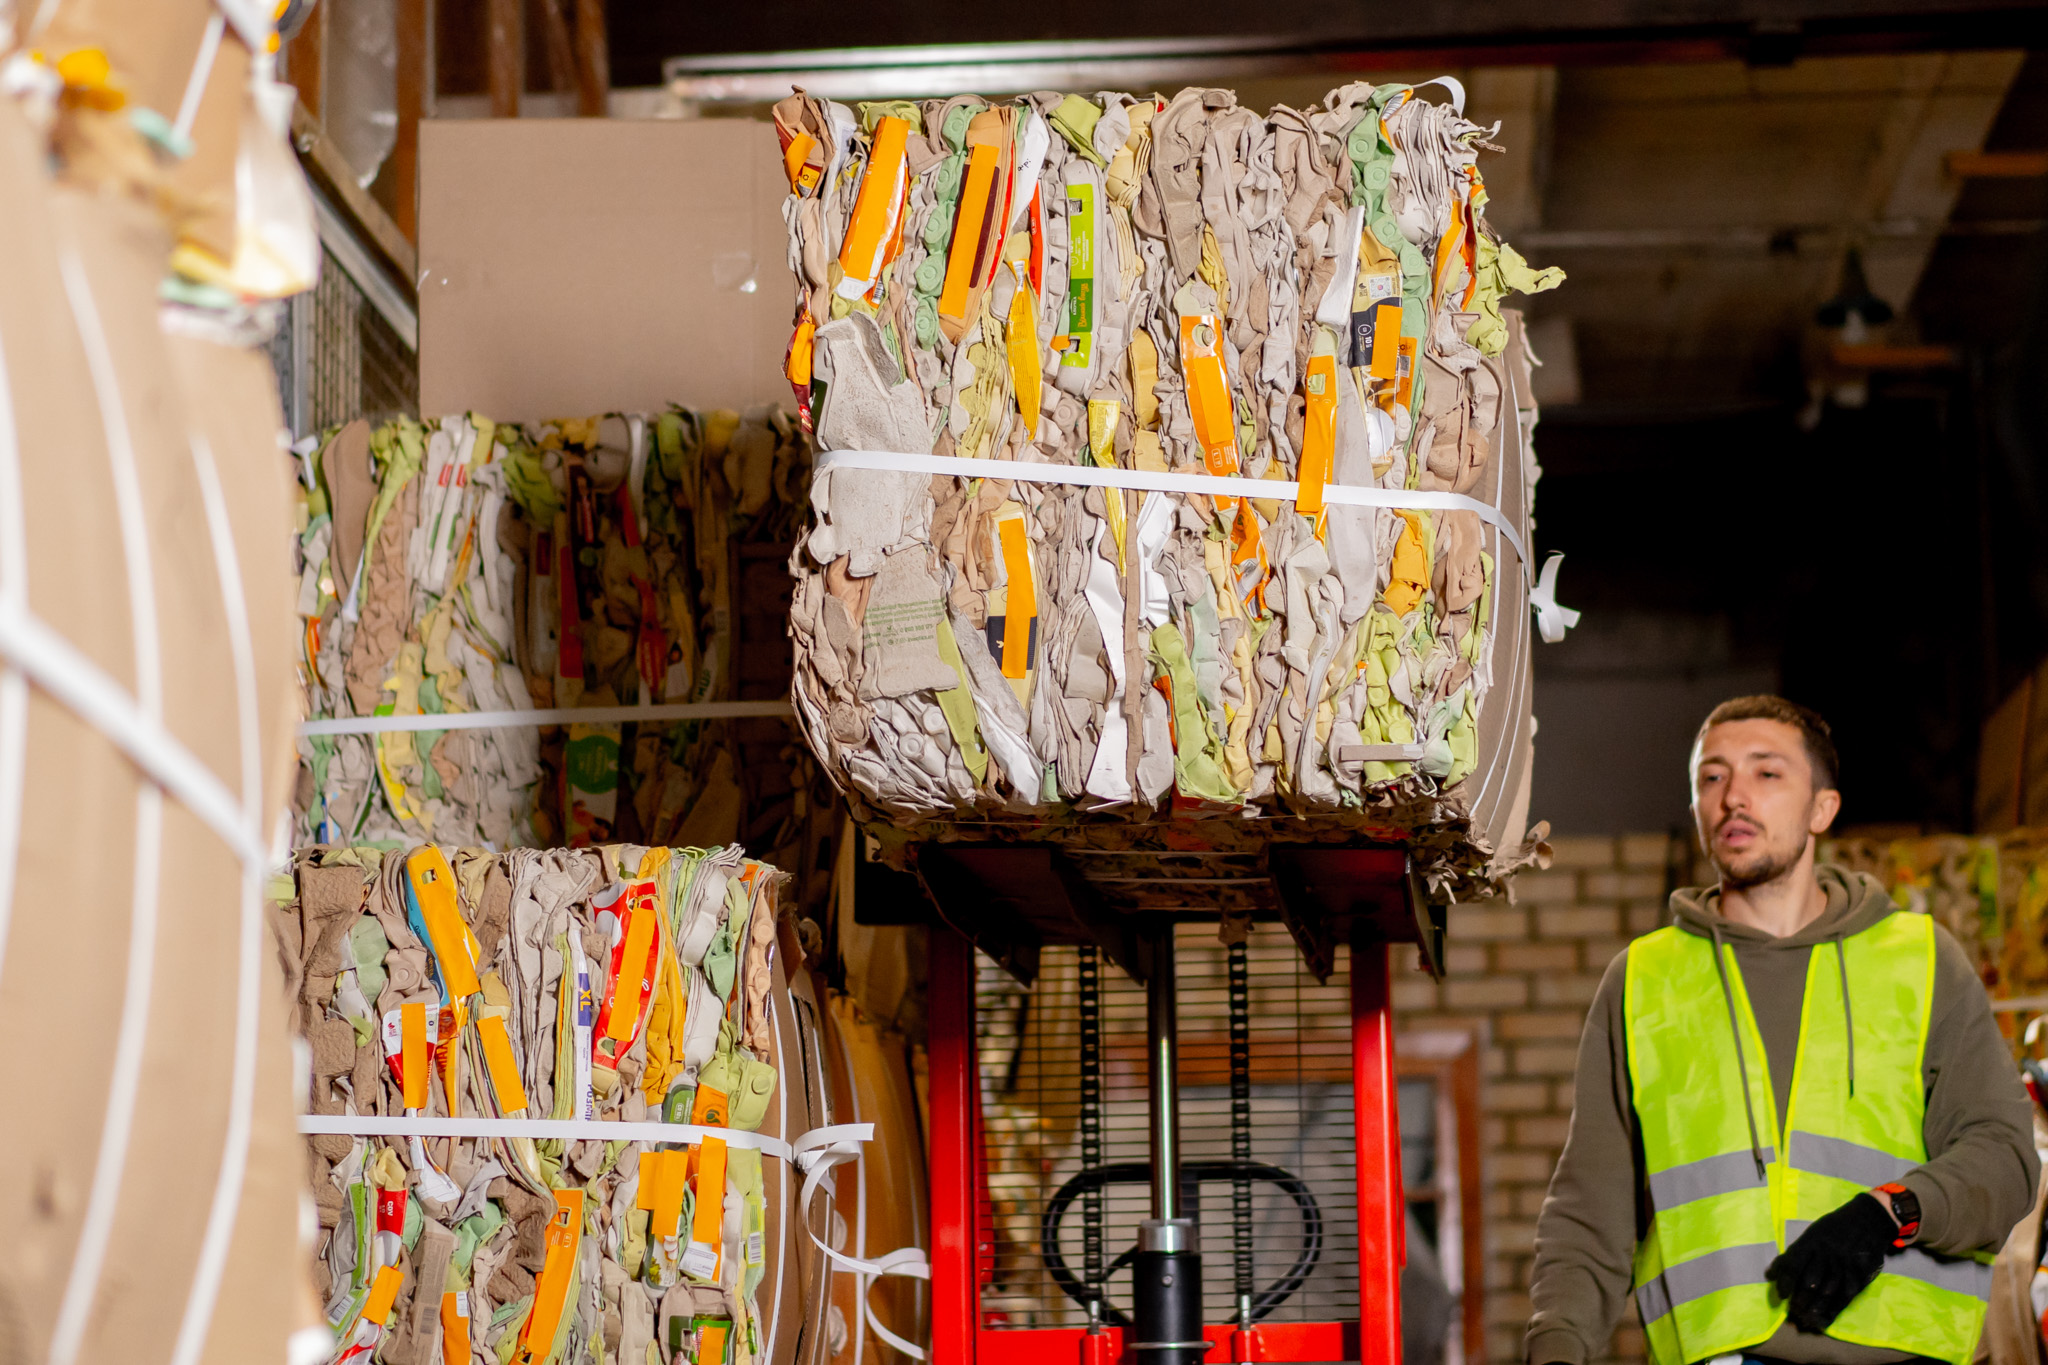 Worker operating a forklift to manage compressed packaging waste at a recycling facility.